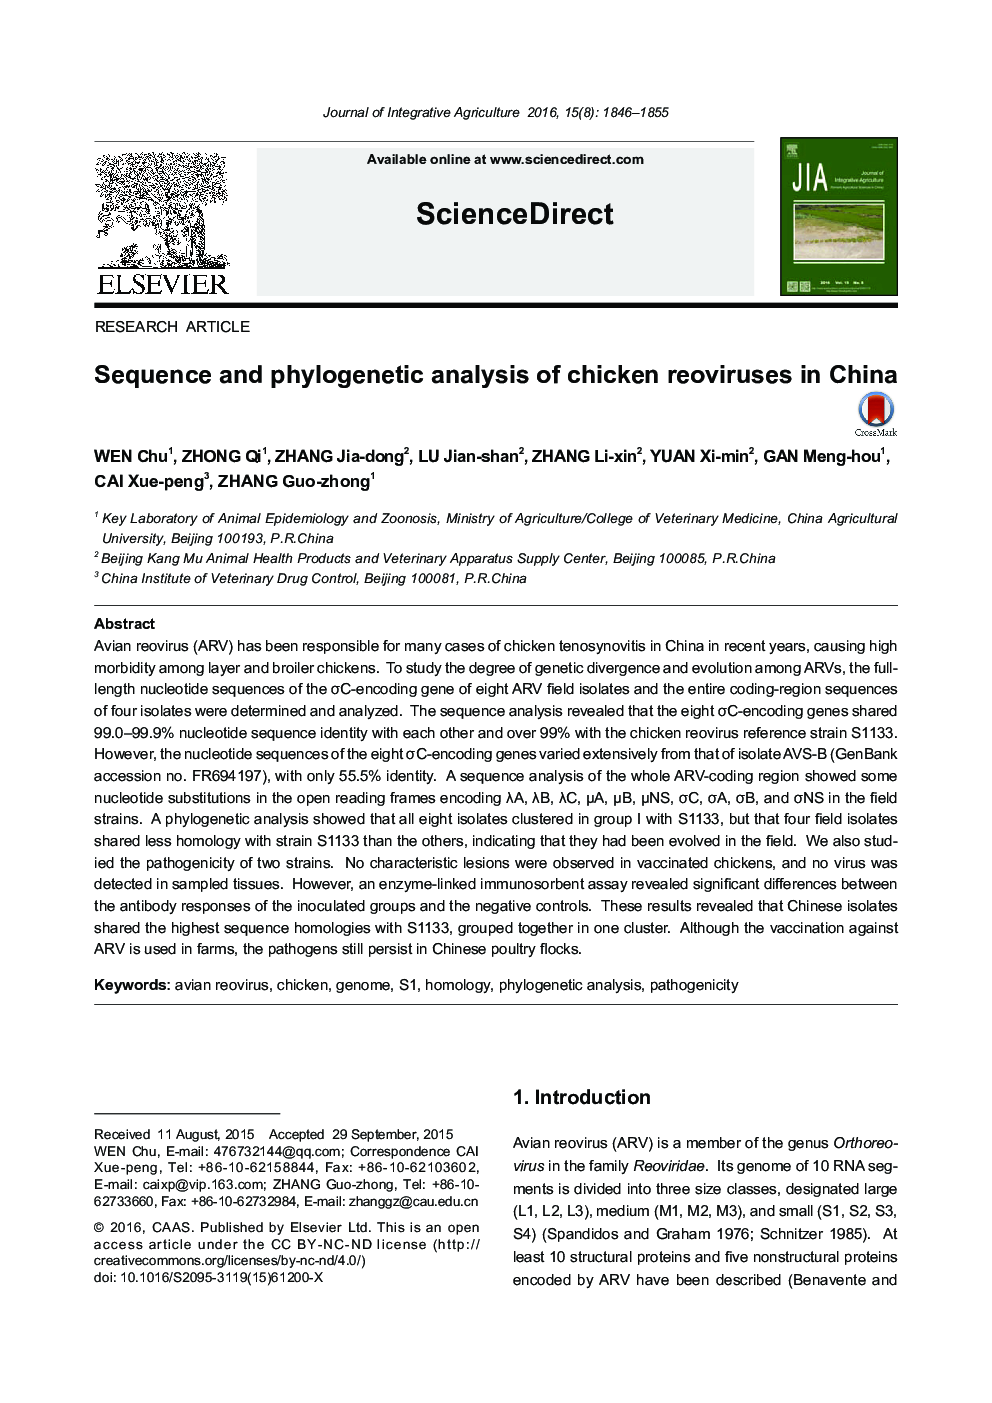 Sequence and phylogenetic analysis of chicken reoviruses in China